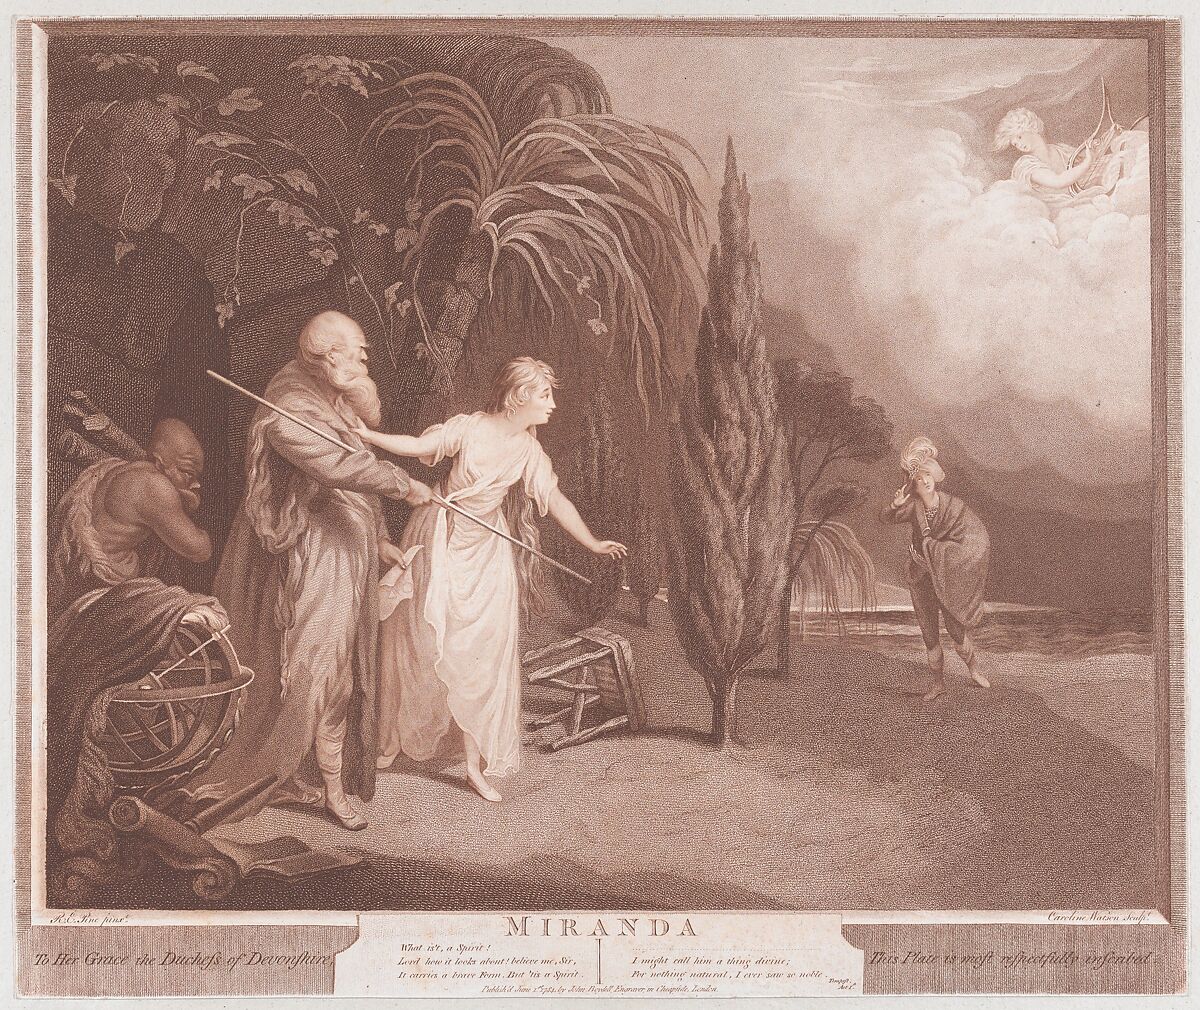 the tempest summary of act 1 scene 2